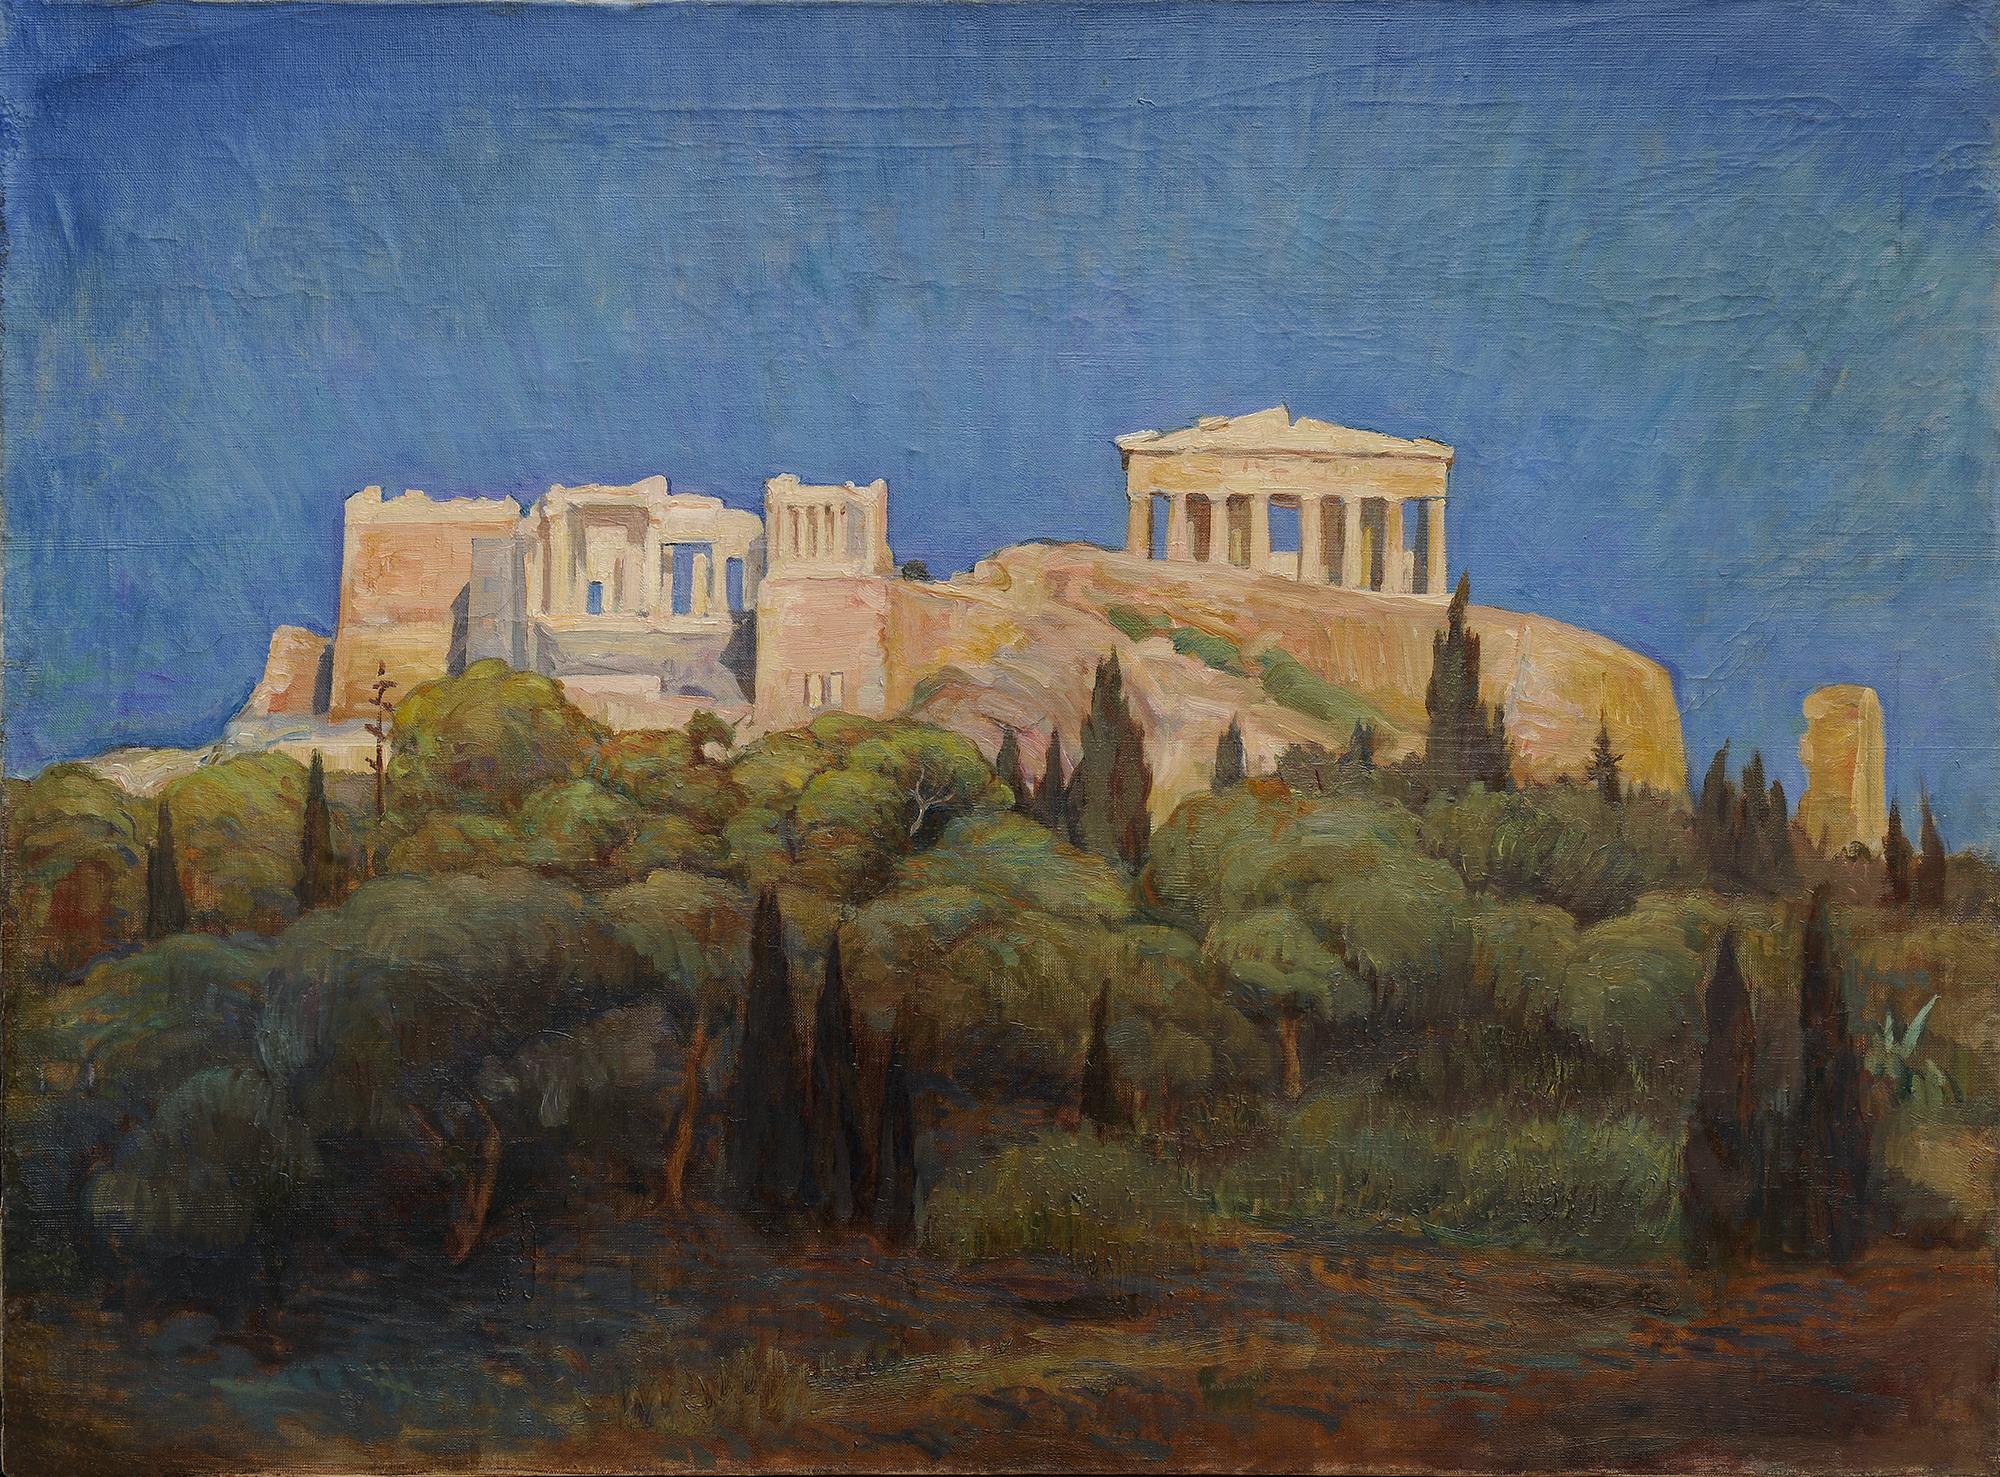 The Acropolis and the Parthenon in Modern Greek art as symbols of national and world heritage